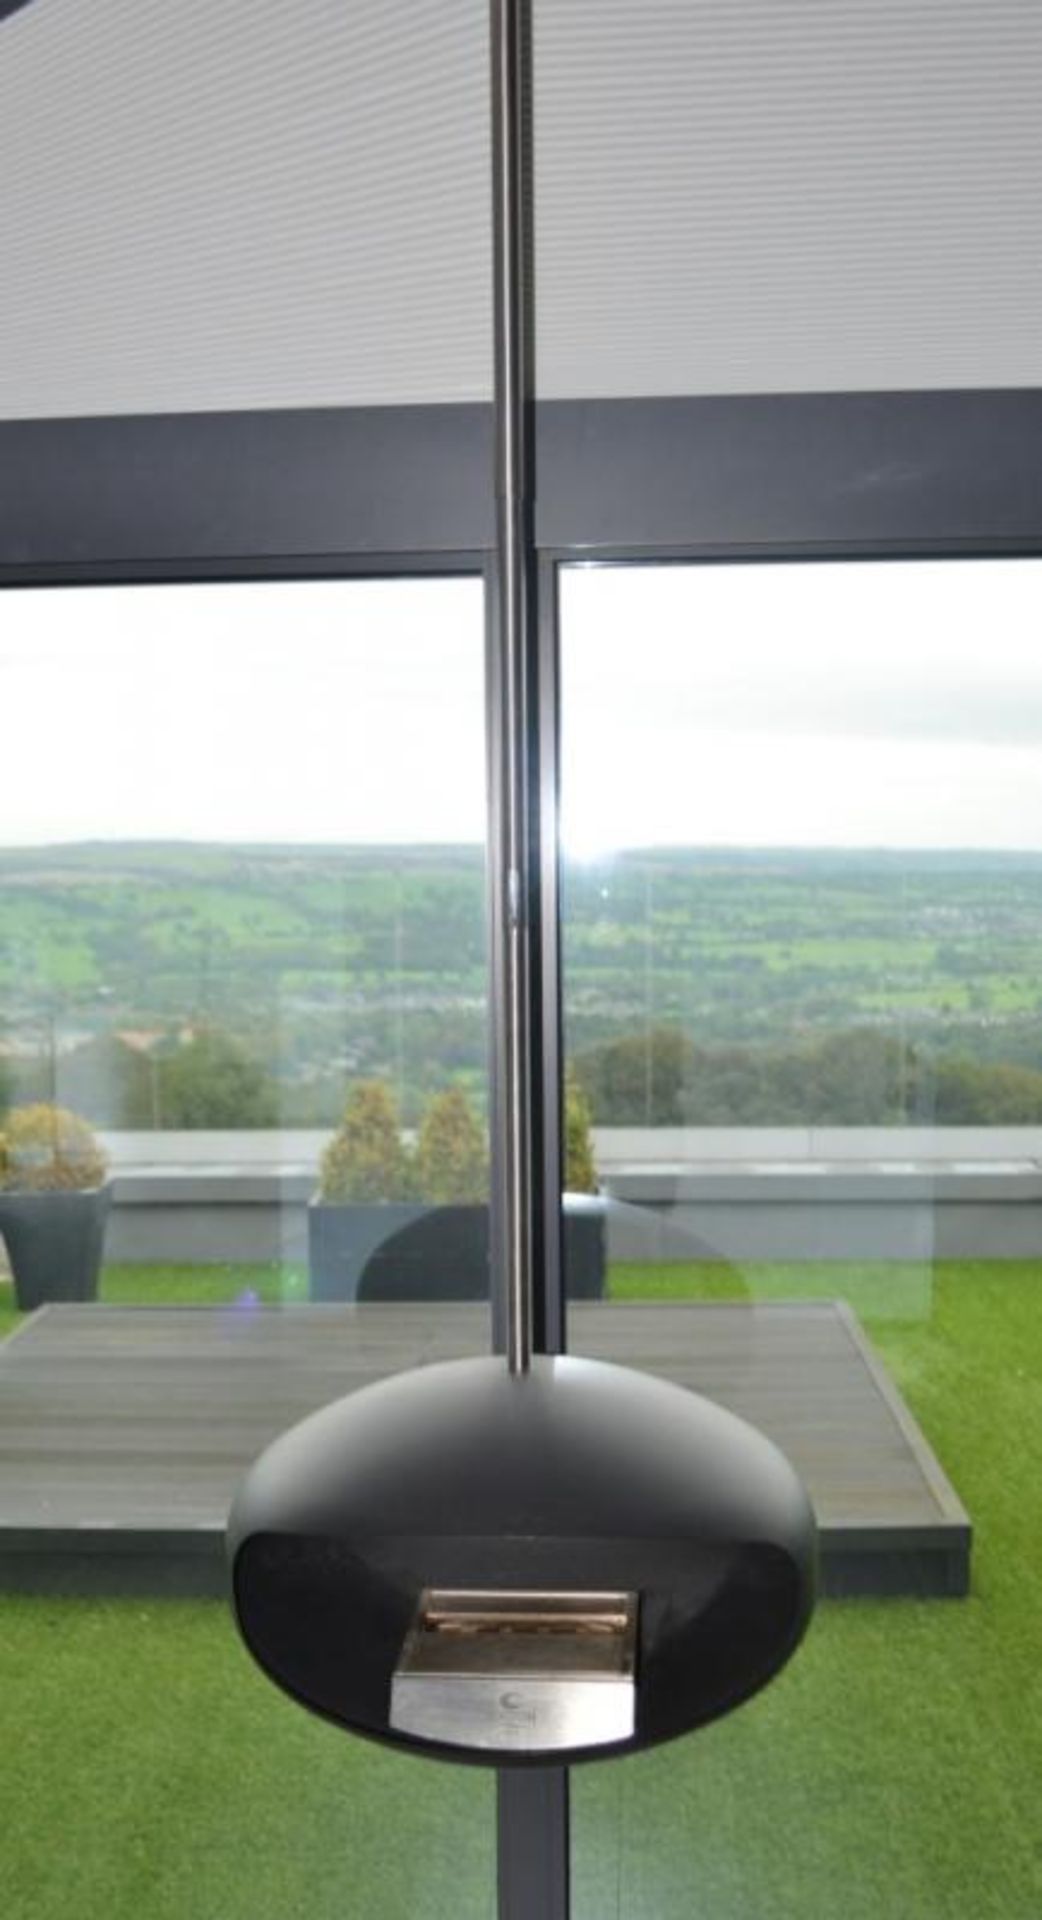 1 x Aeris Hanging Cocoon Fireplace Finished In Black - CL439 - Location: Ilkley LS29 - Used In Excel - Image 2 of 5